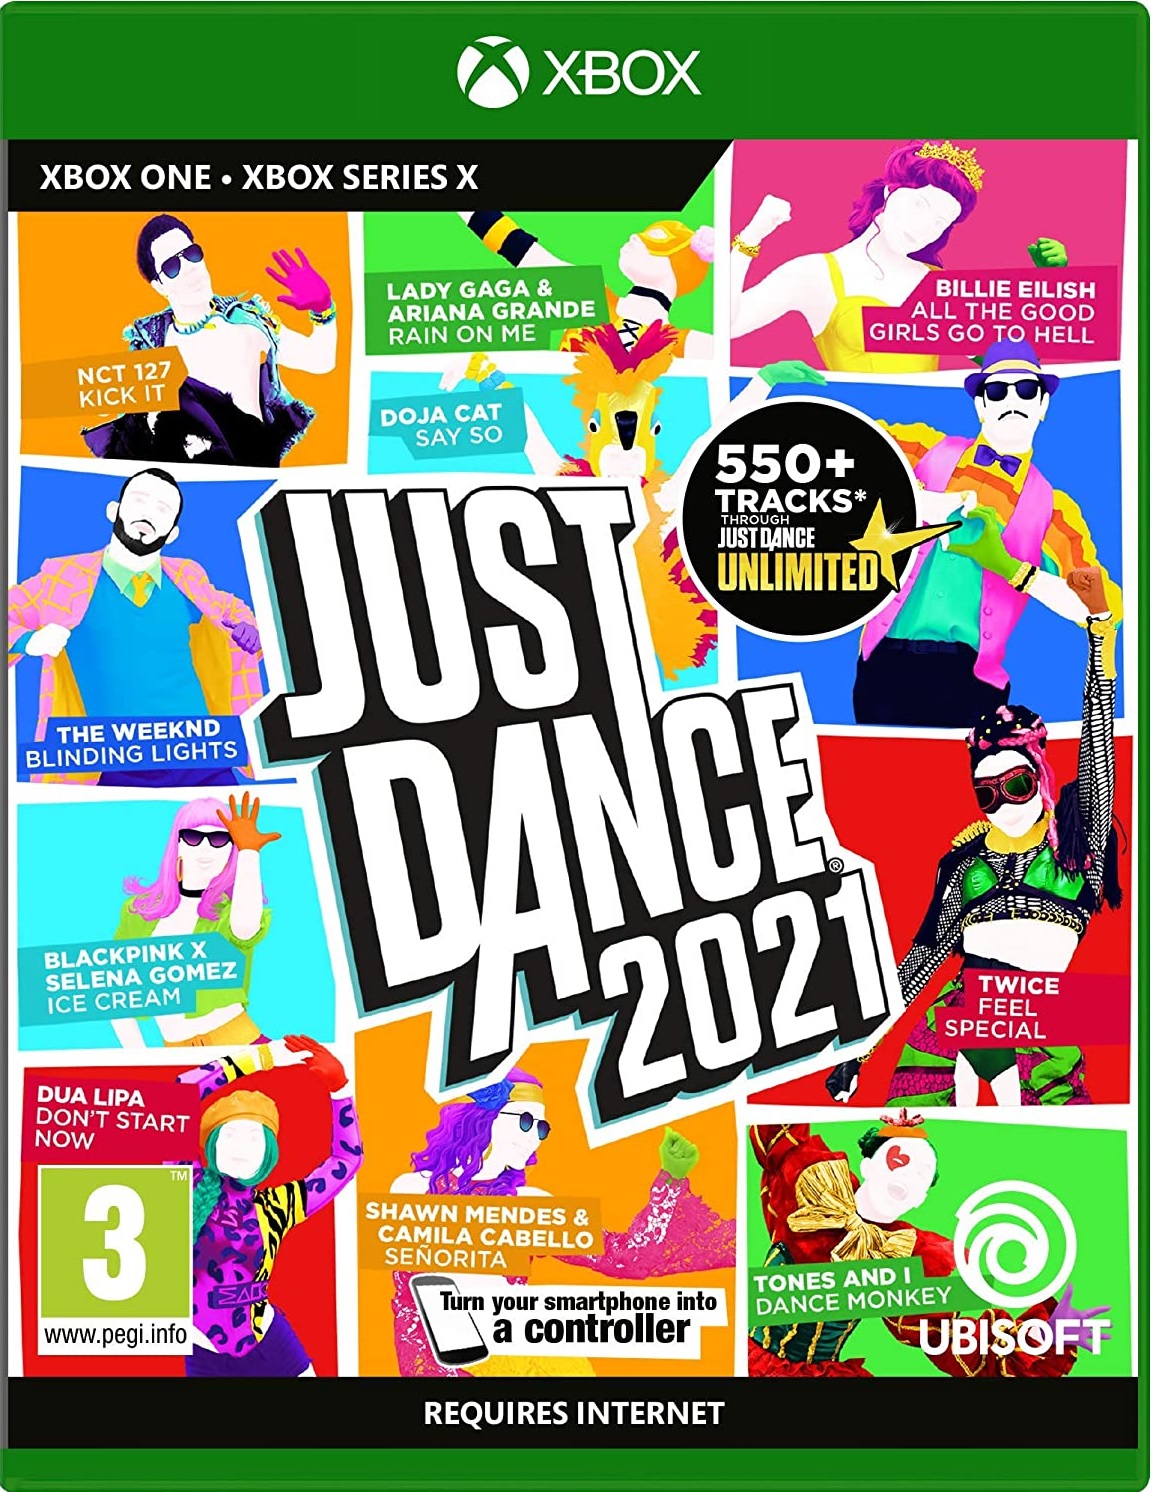 Just Dance 2021 /Xbox One